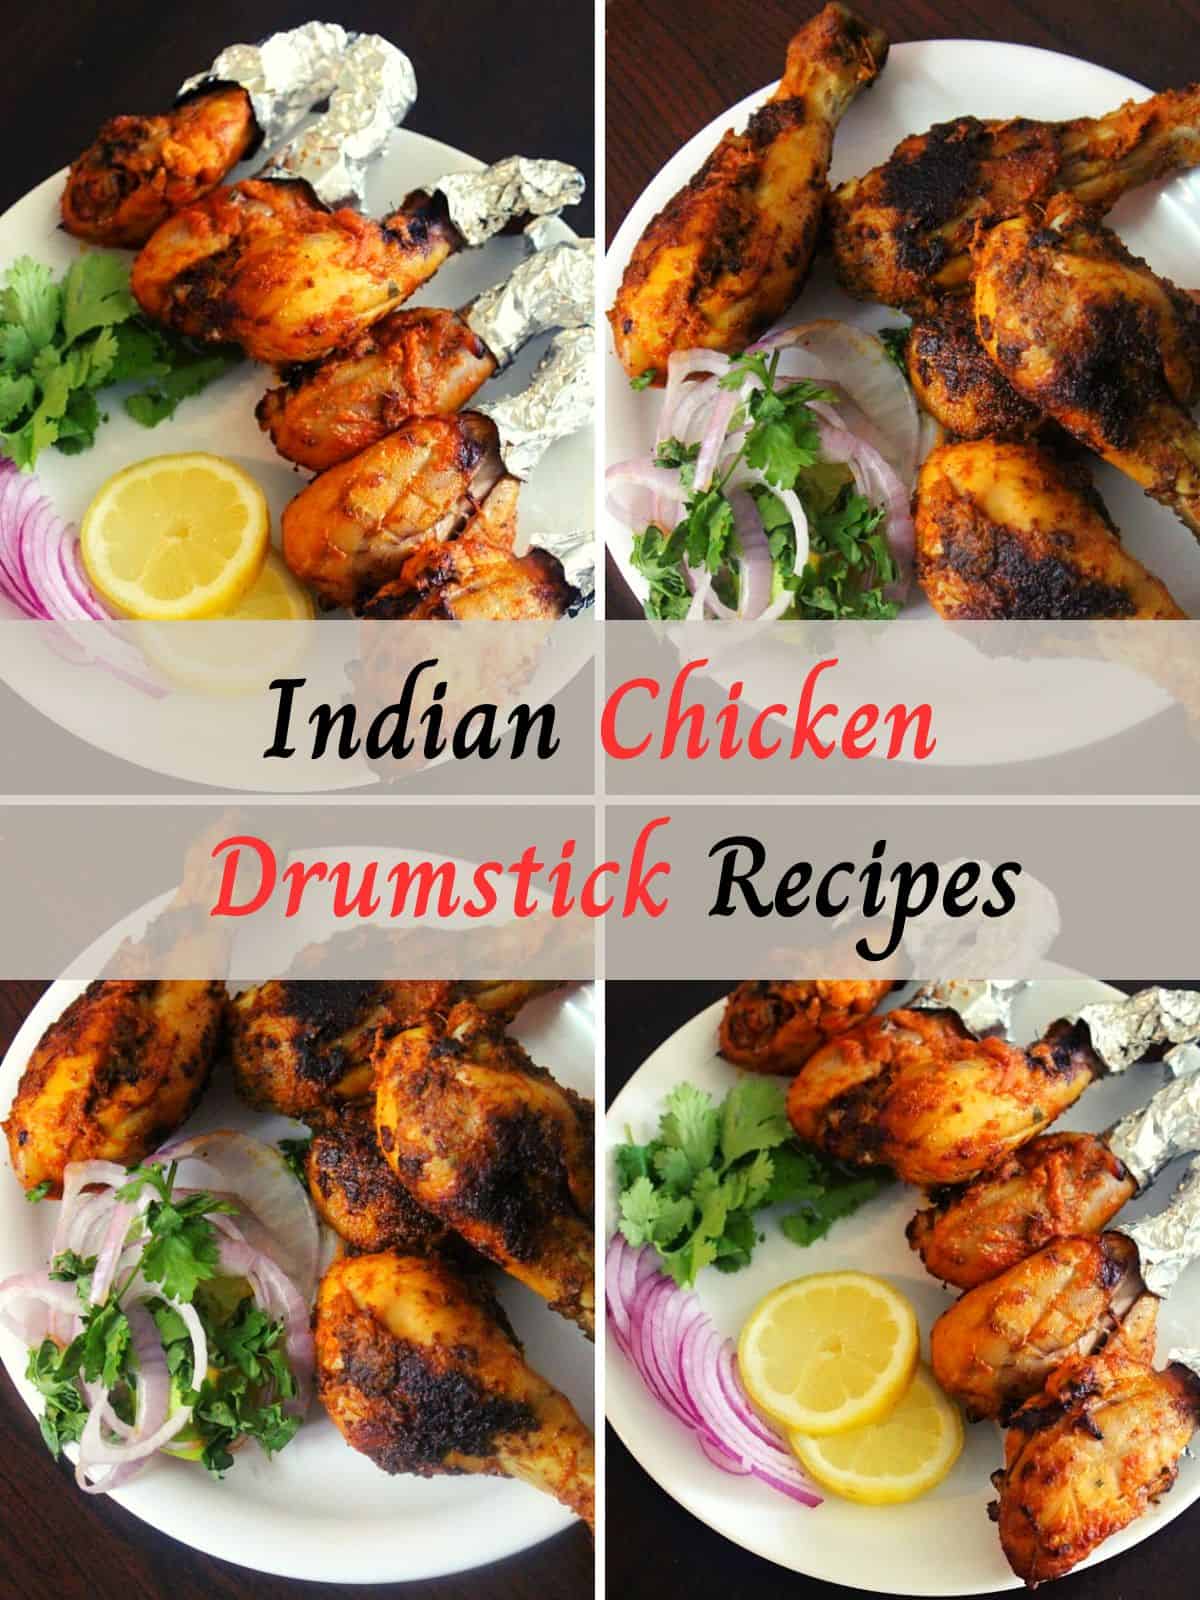 Chicken drumstick recipes made in Indian style in a collage